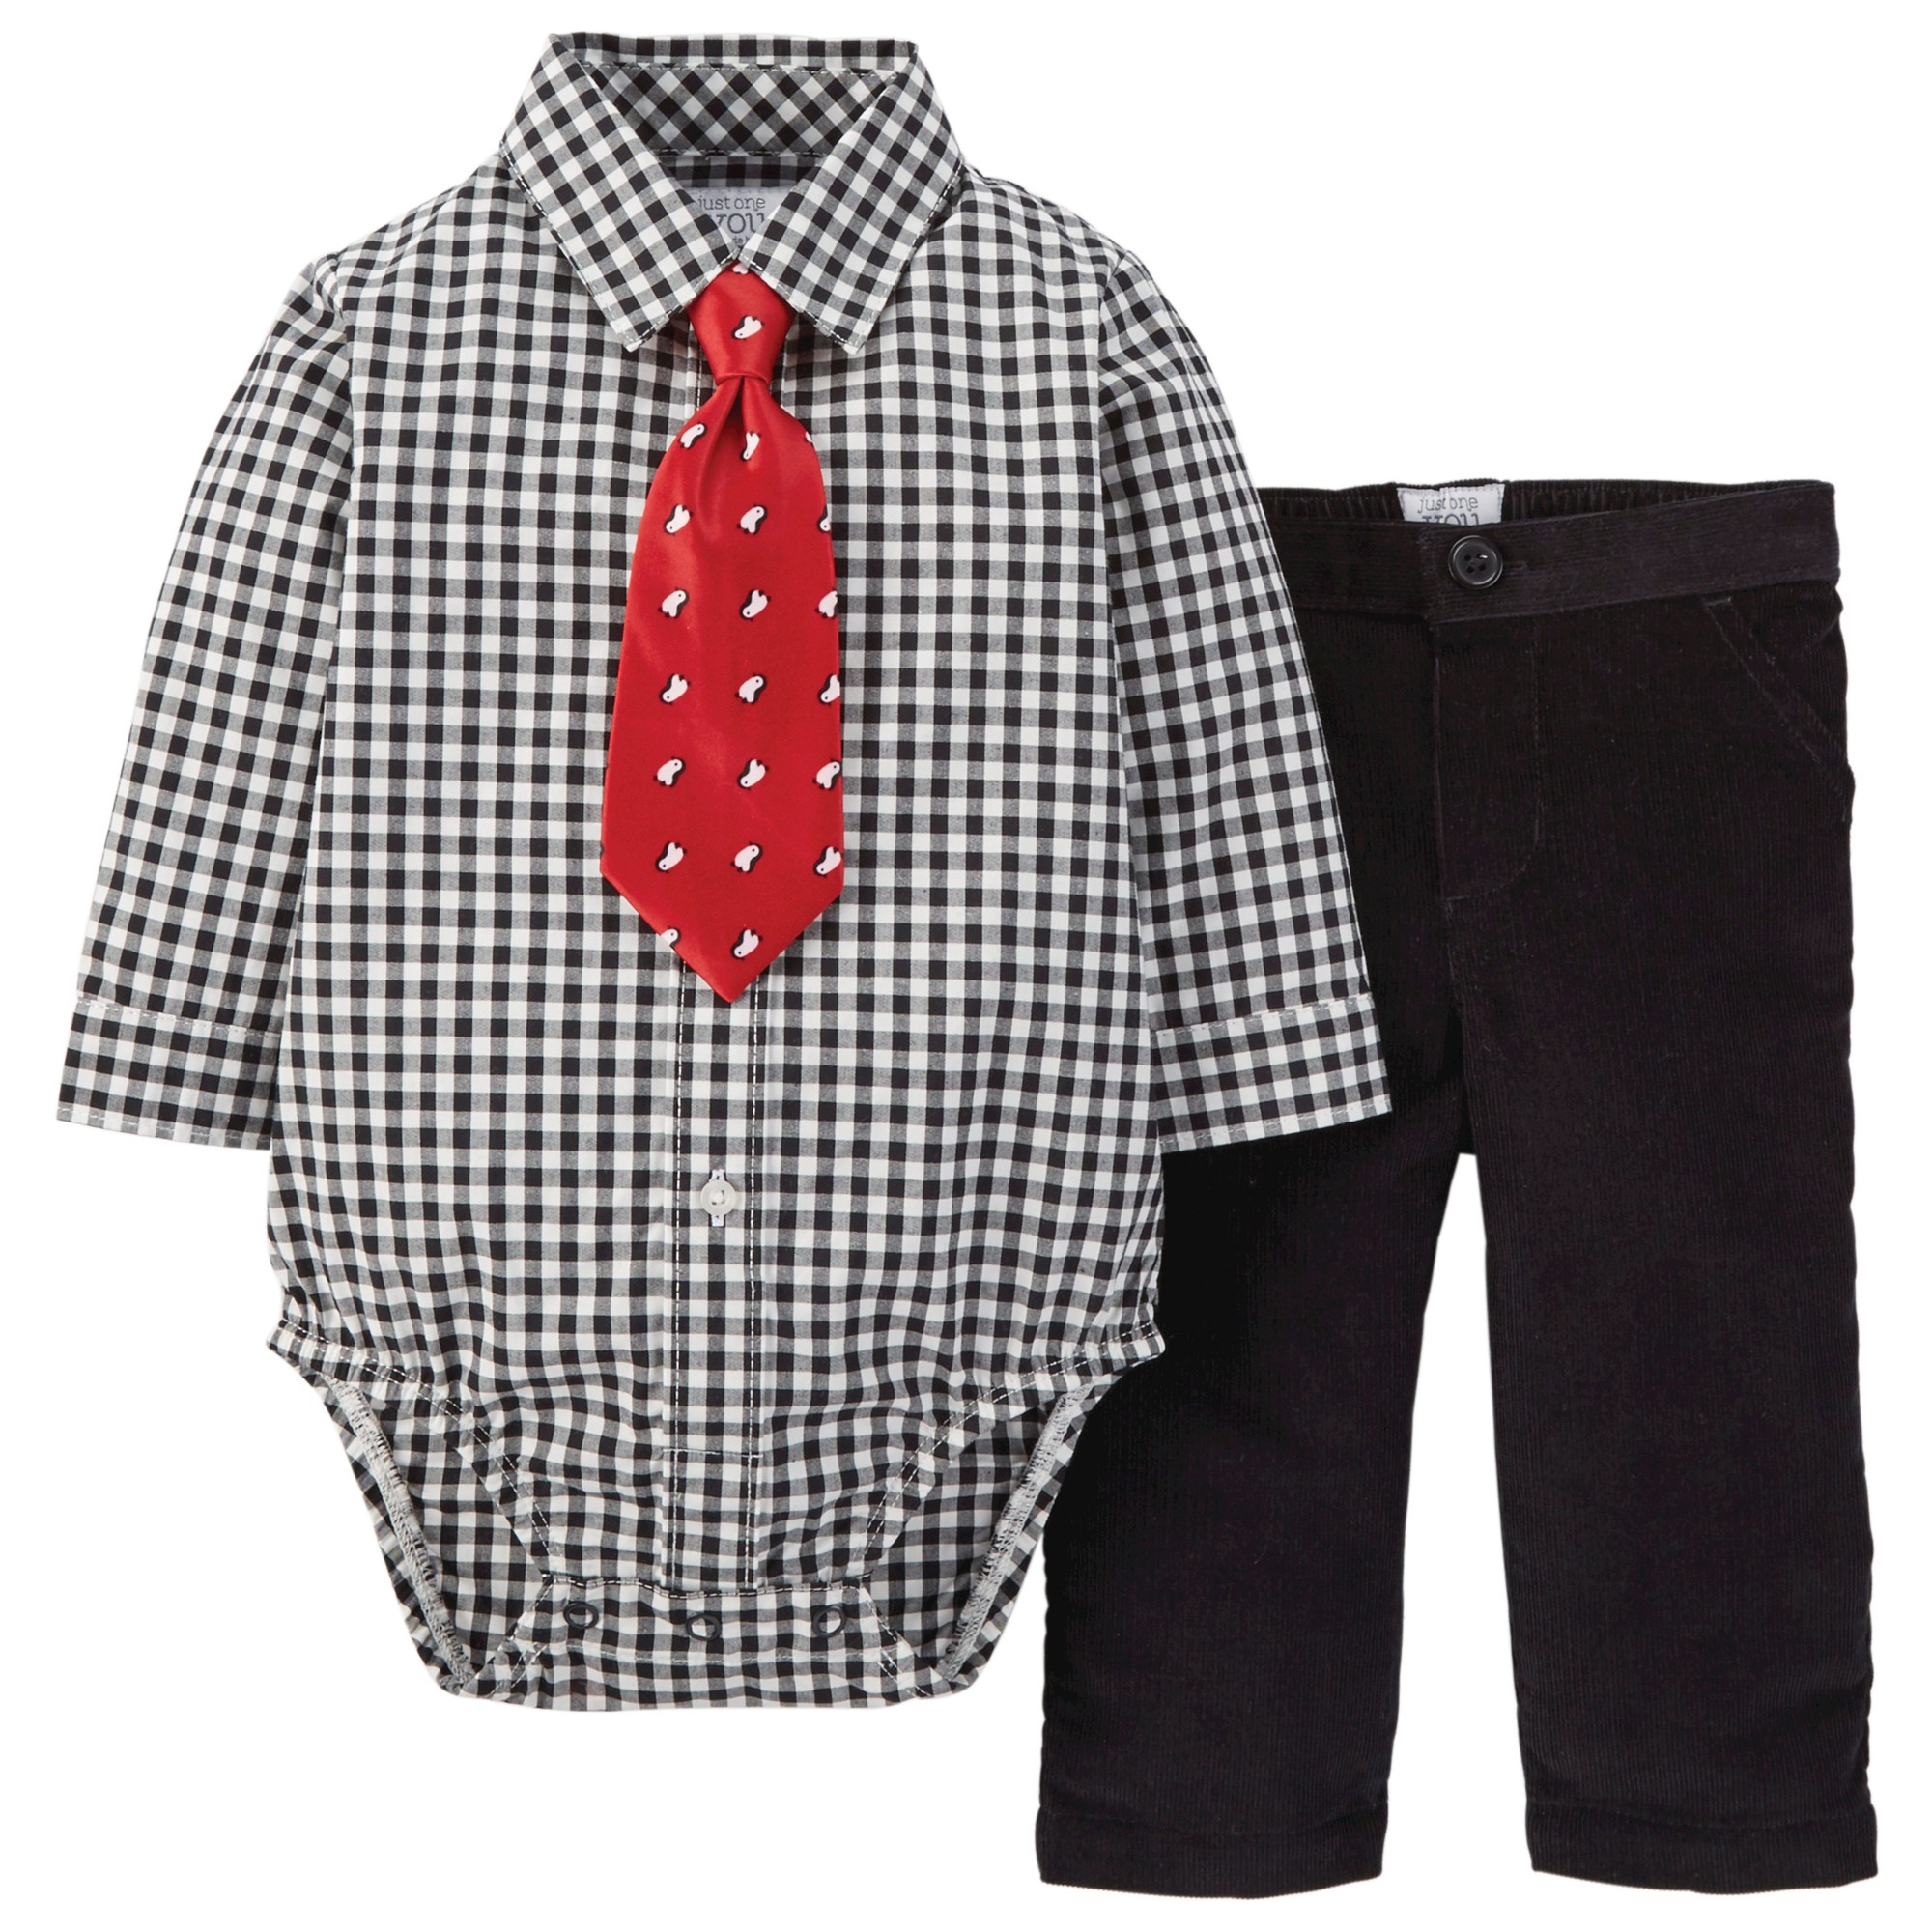 Three-Piece Outfit with Tie from Target